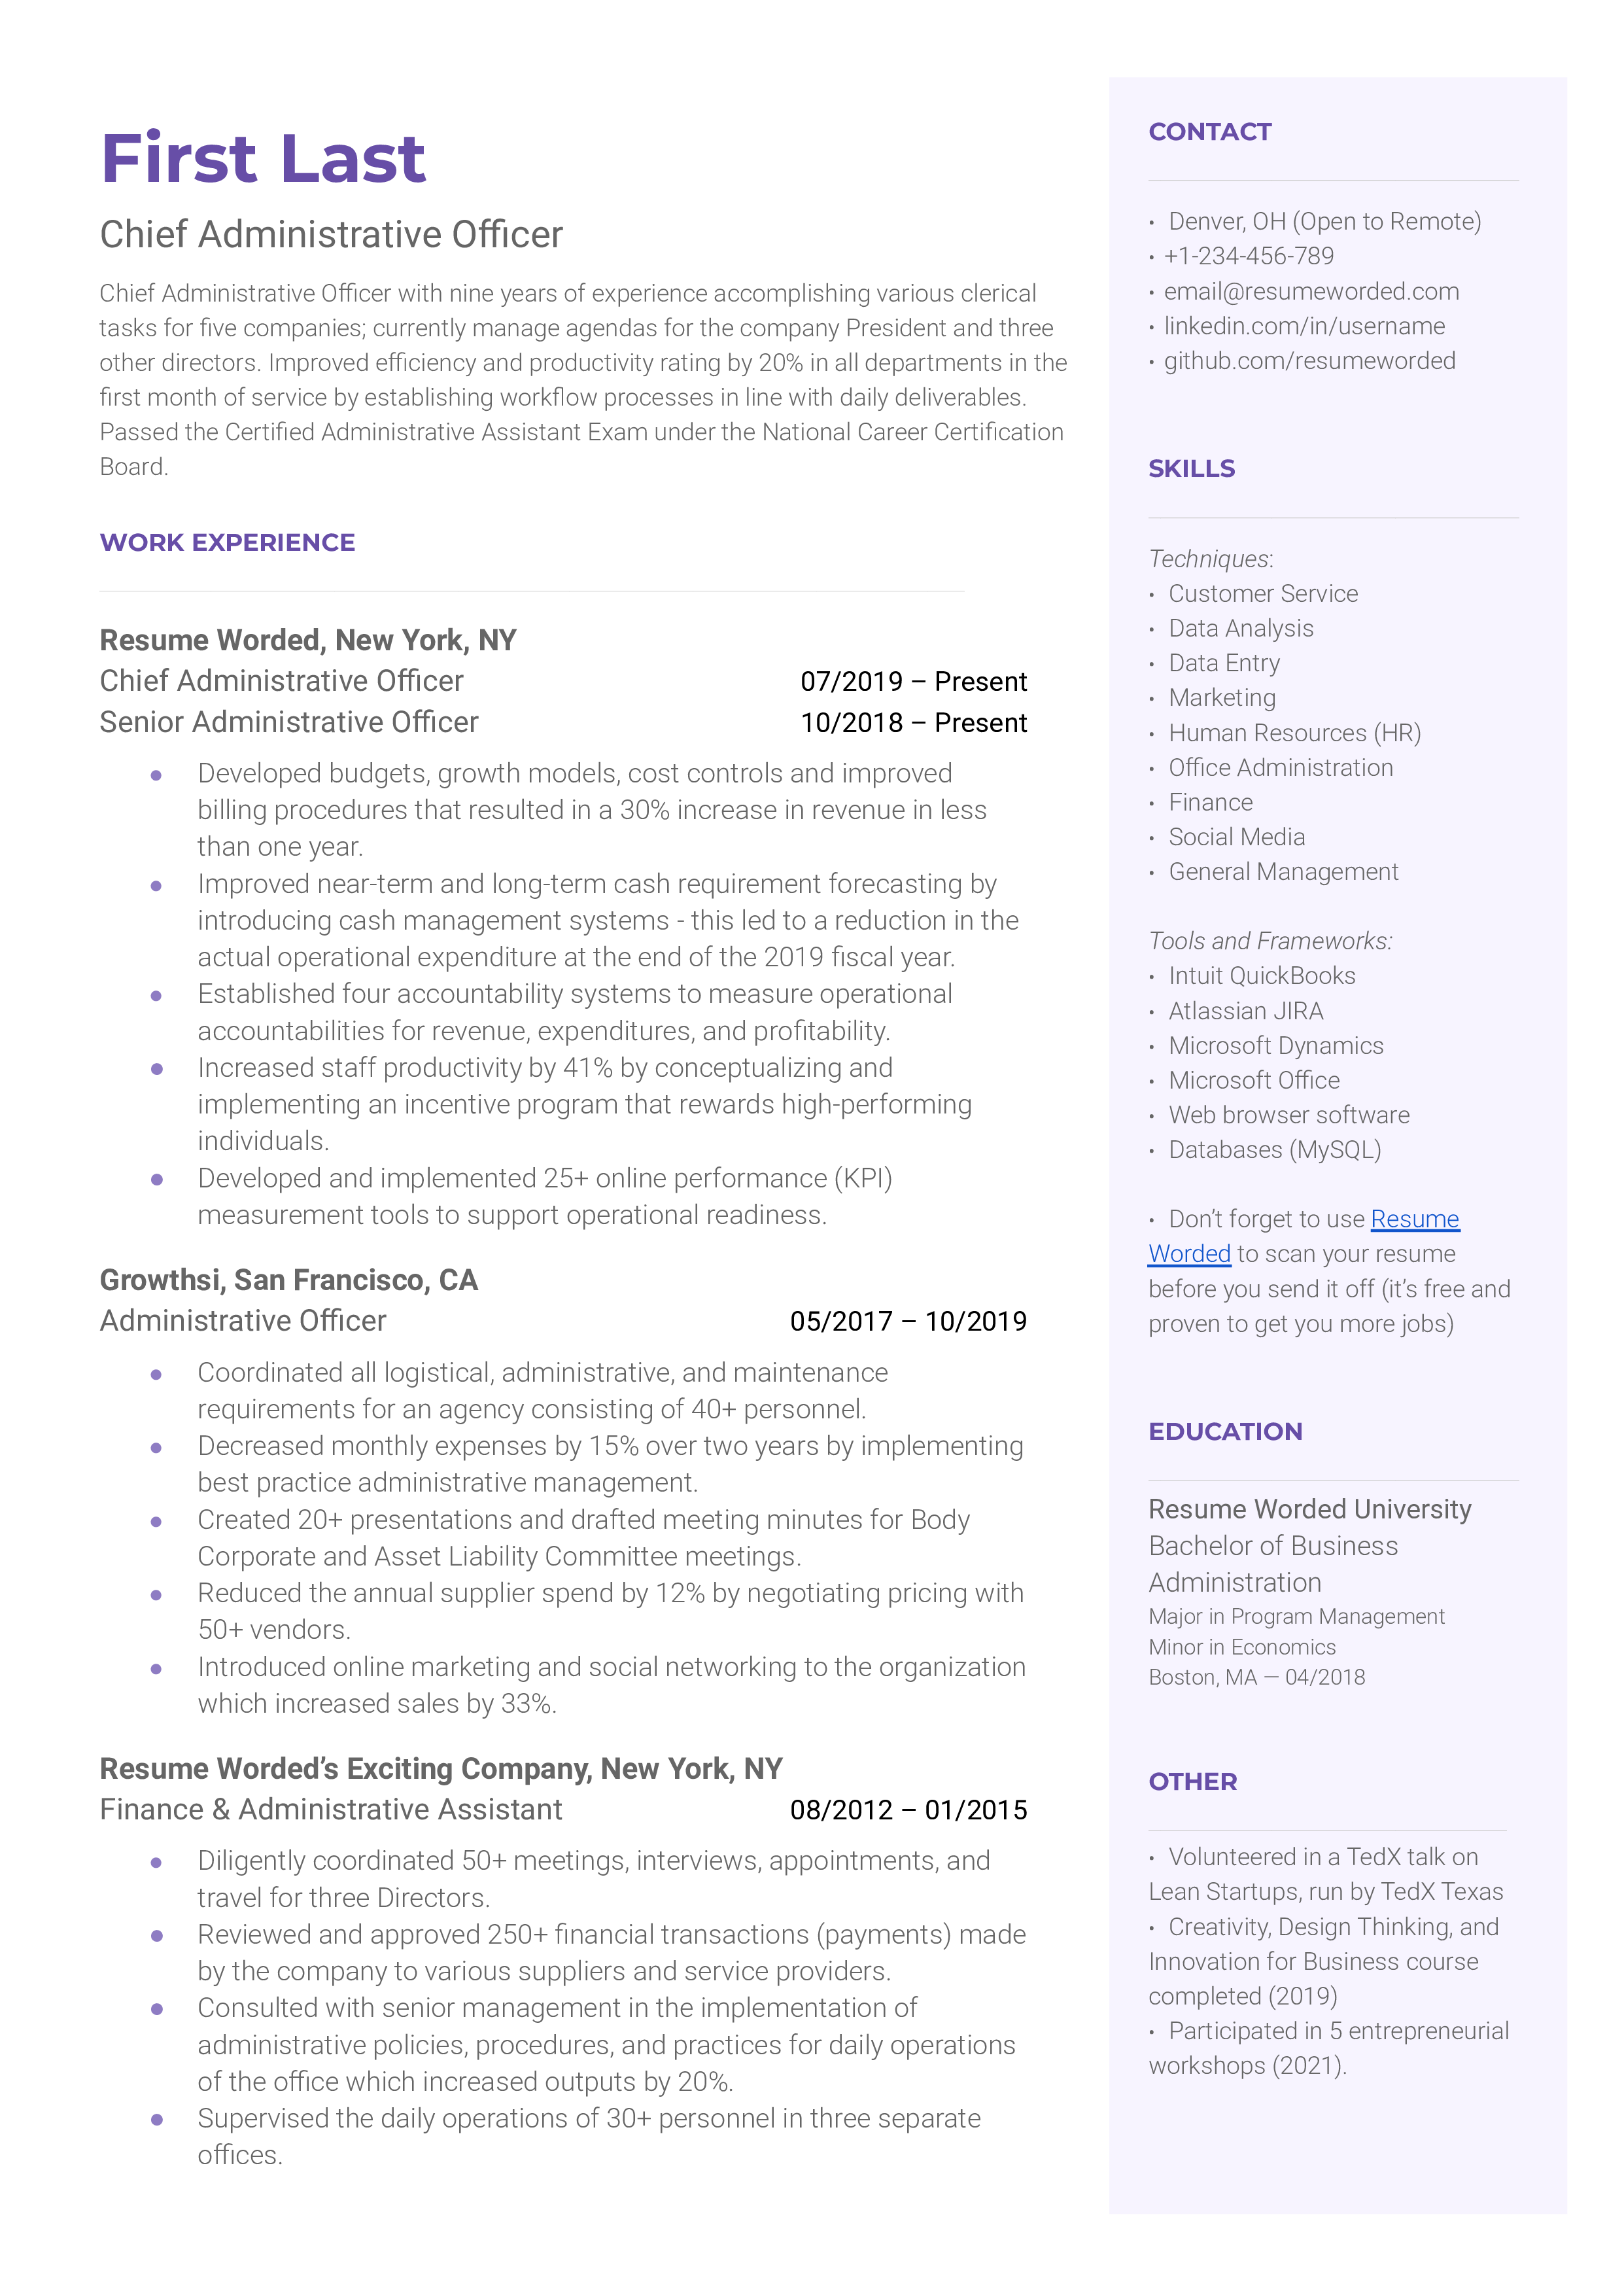 A chief administrative officer resume sample that highlights the applicant's industry specific skill set and experience